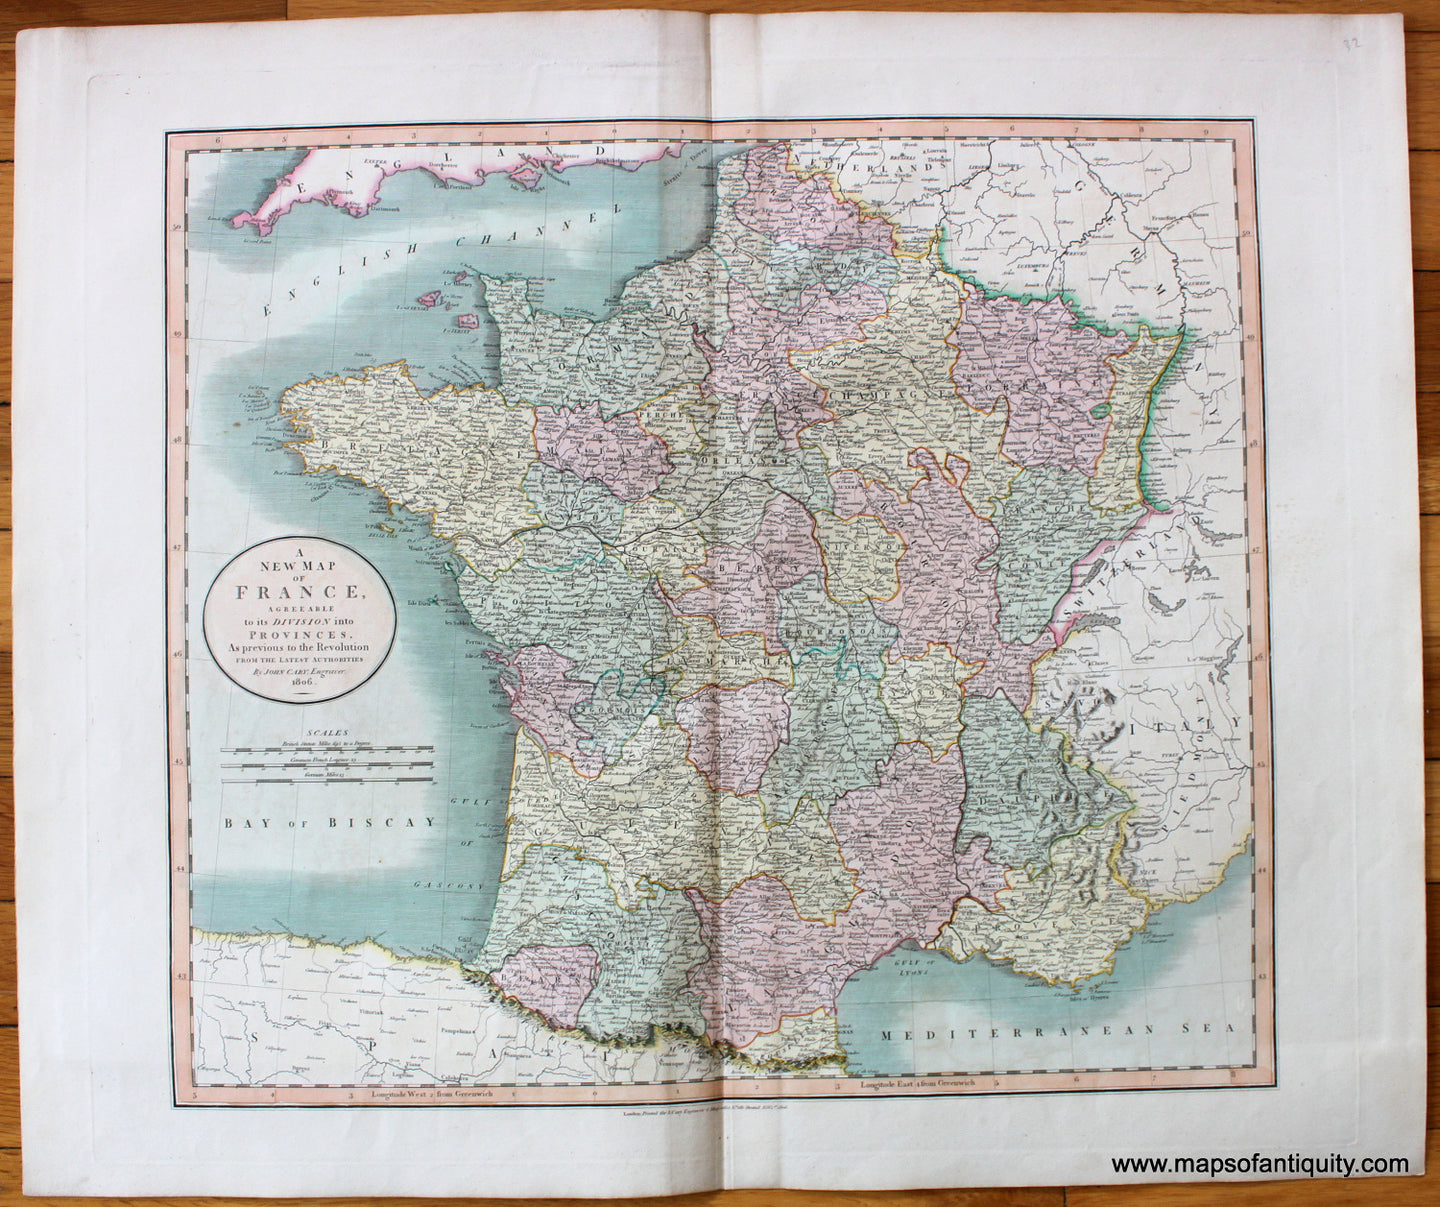 Antique-Hand-Colored-Map-A-New-Map-of-France-Agreeable-to-its-Division-into-Provinces-as-Previous-to-the-Revolution-from-the-Latest-Authorities-Europe-France-1806-Cary-Maps-Of-Antiquity